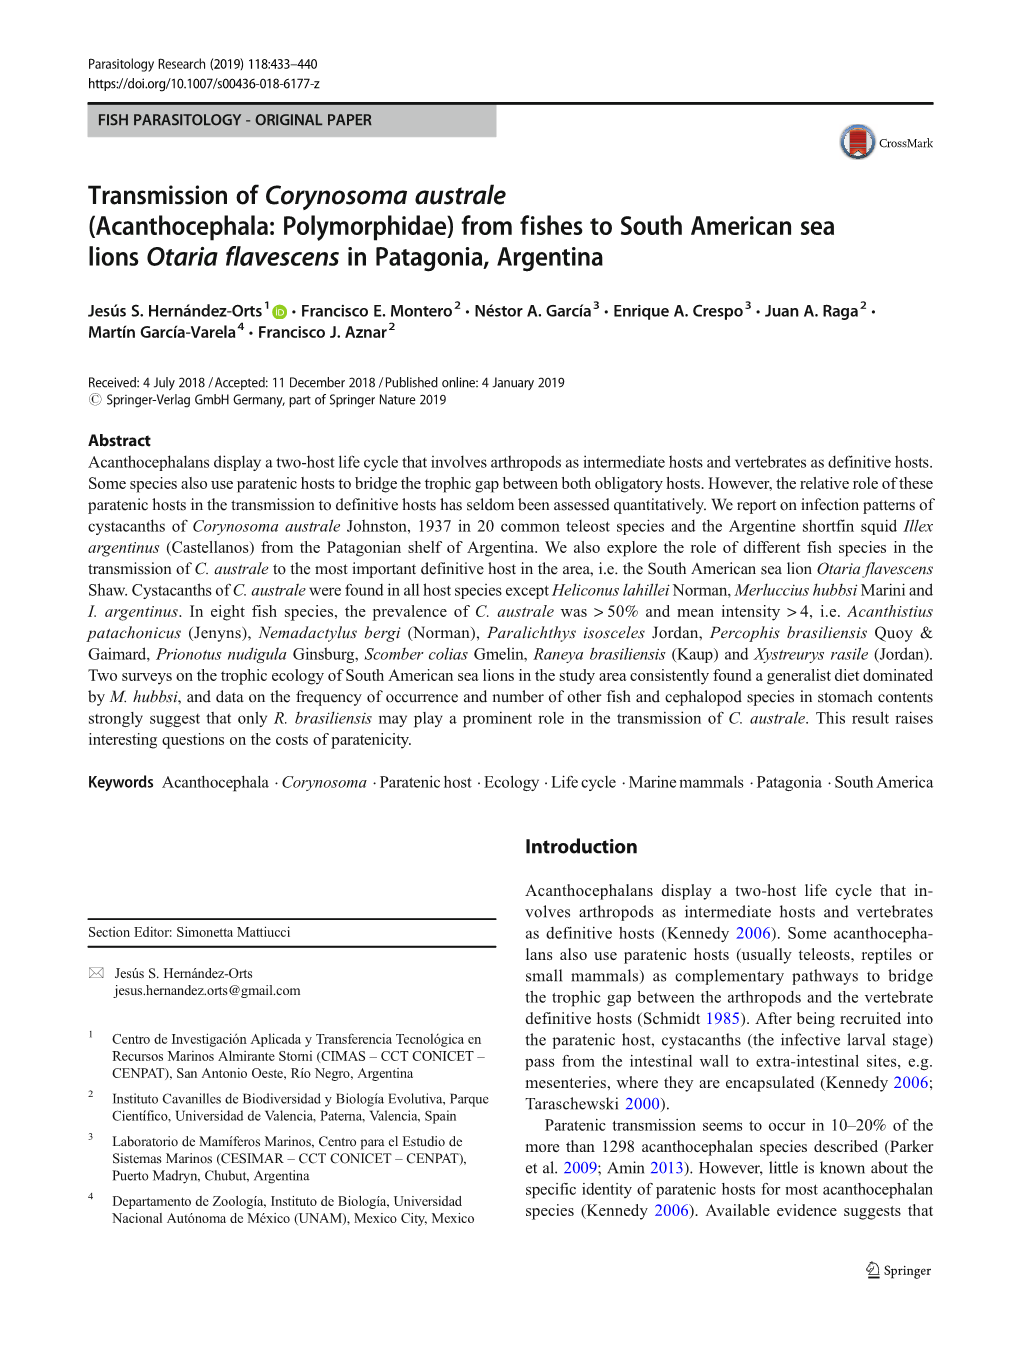 Transmission of Corynosoma Australe (Acanthocephala: Polymorphidae) from Fishes to South American Sea Lions Otaria Flavescens in Patagonia, Argentina